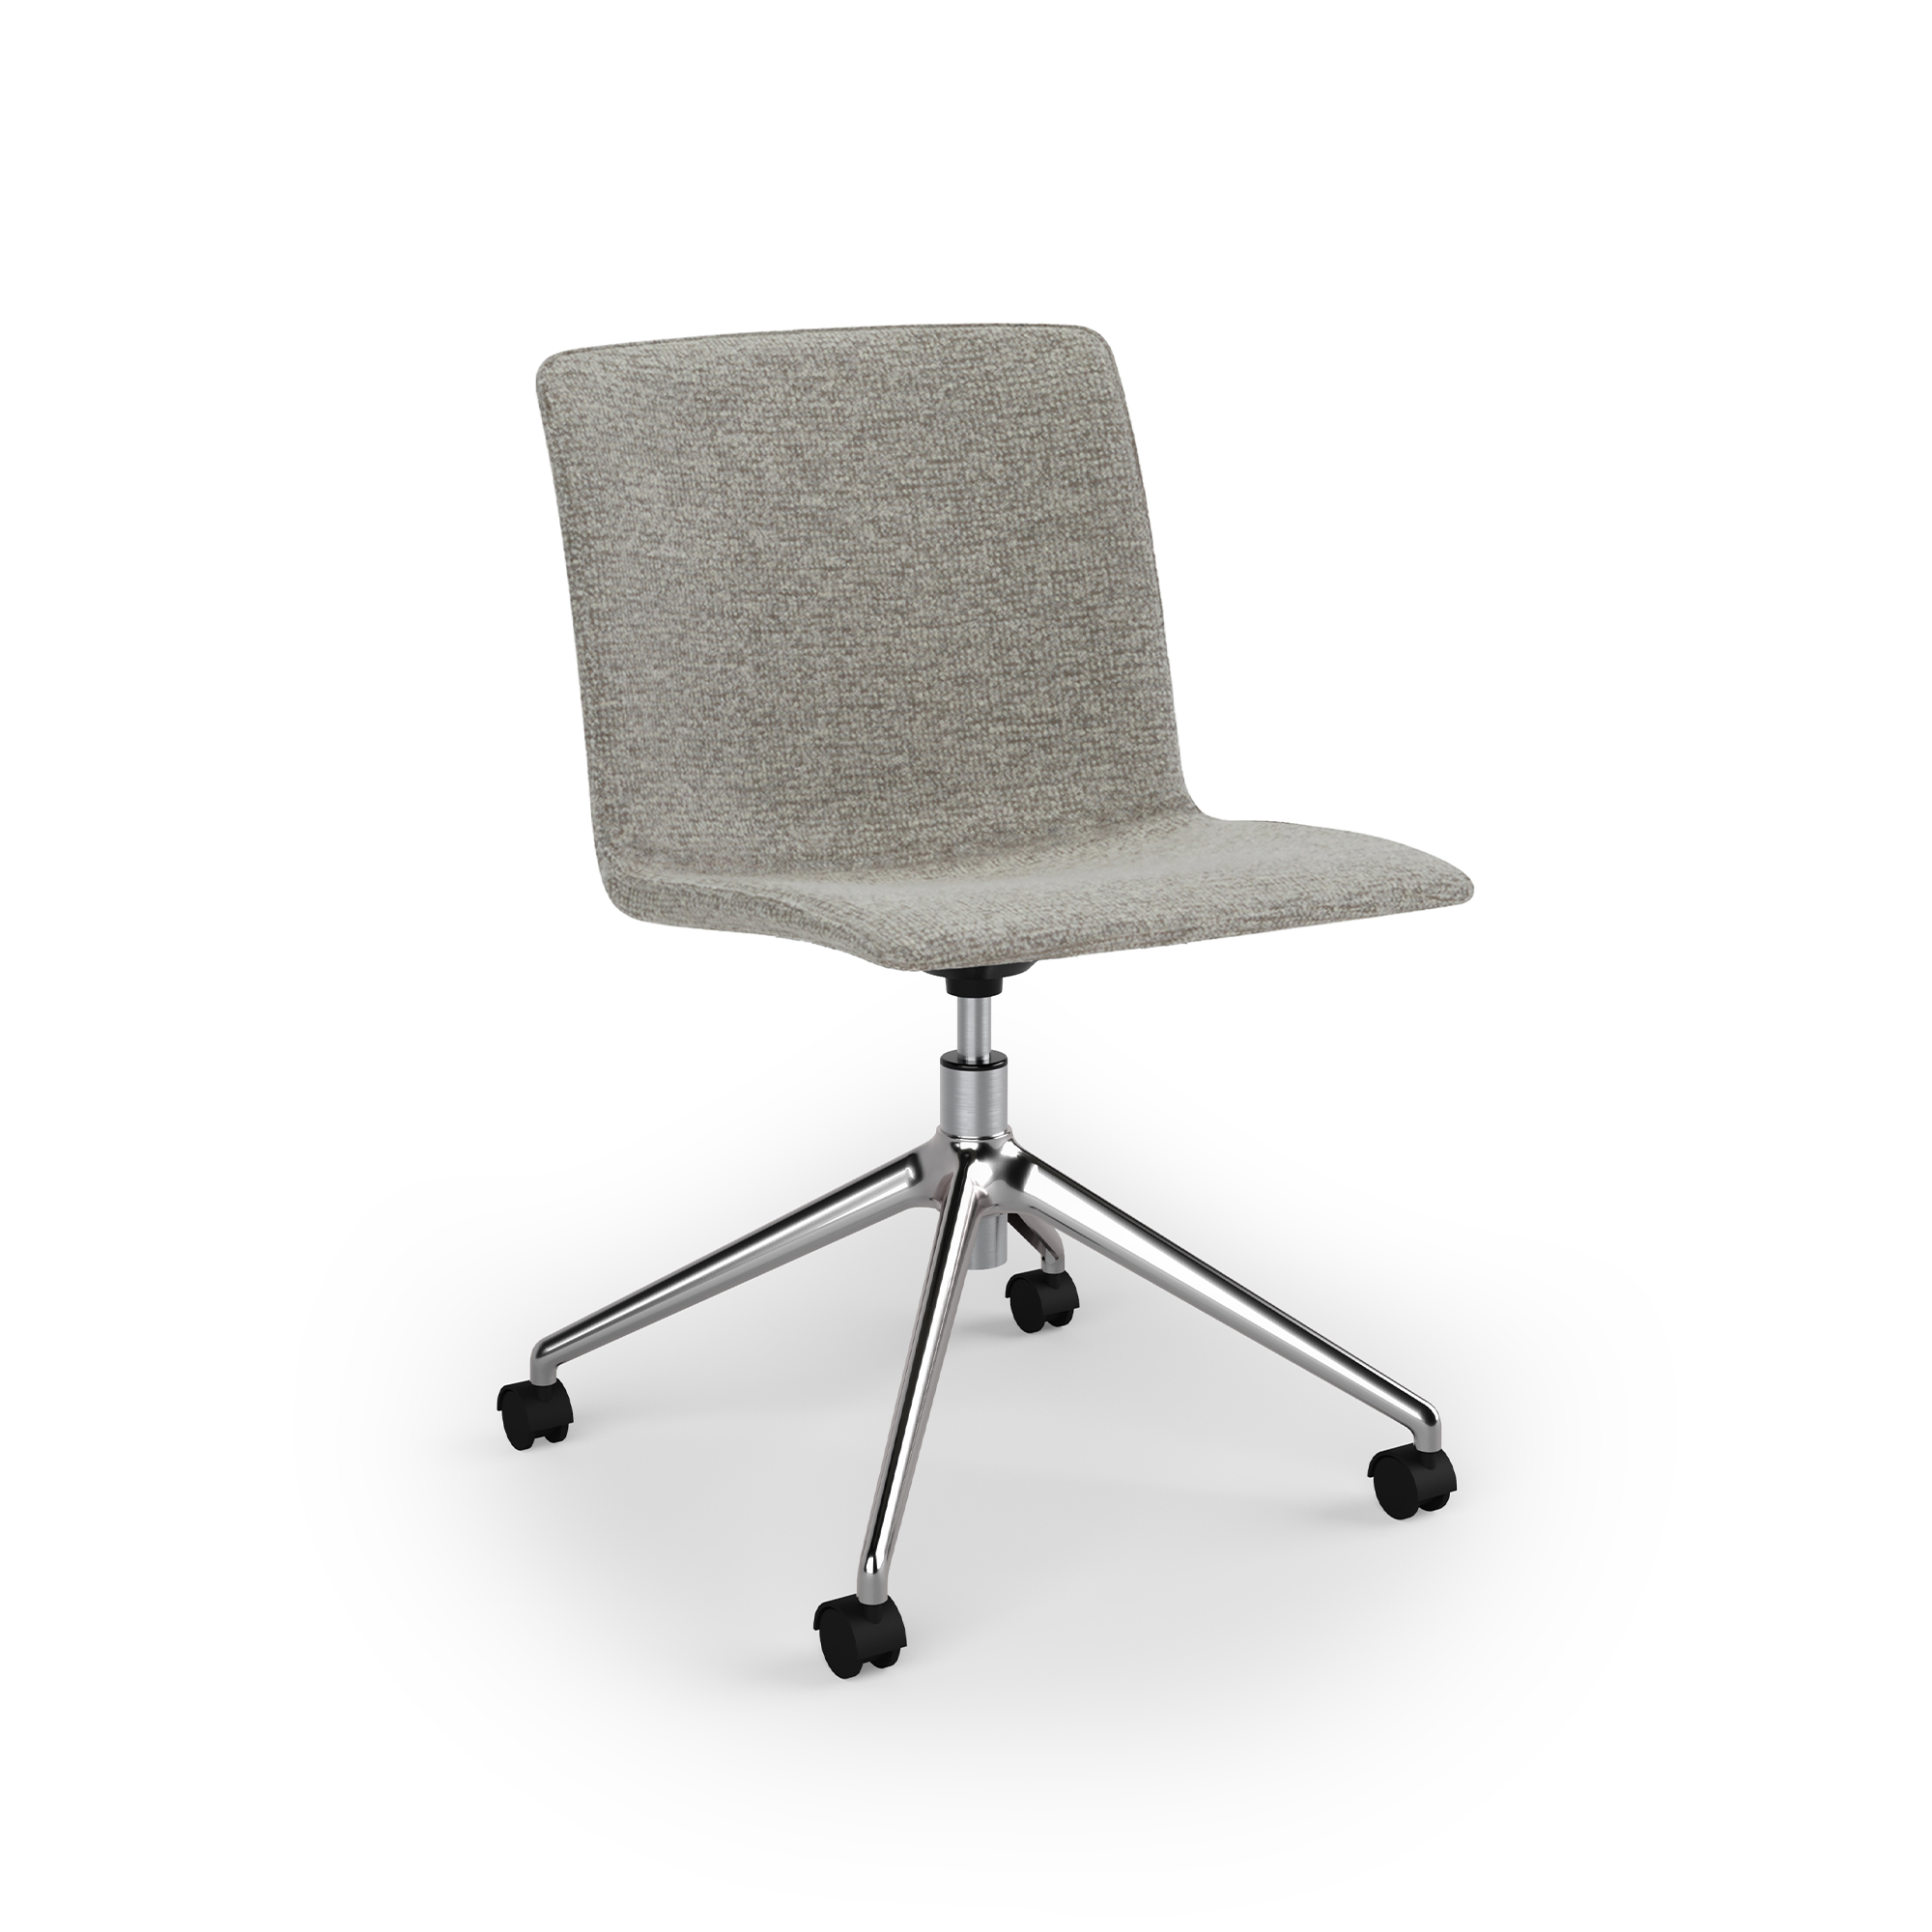 Kitsy Guest Chair, Swivel Base, Casters